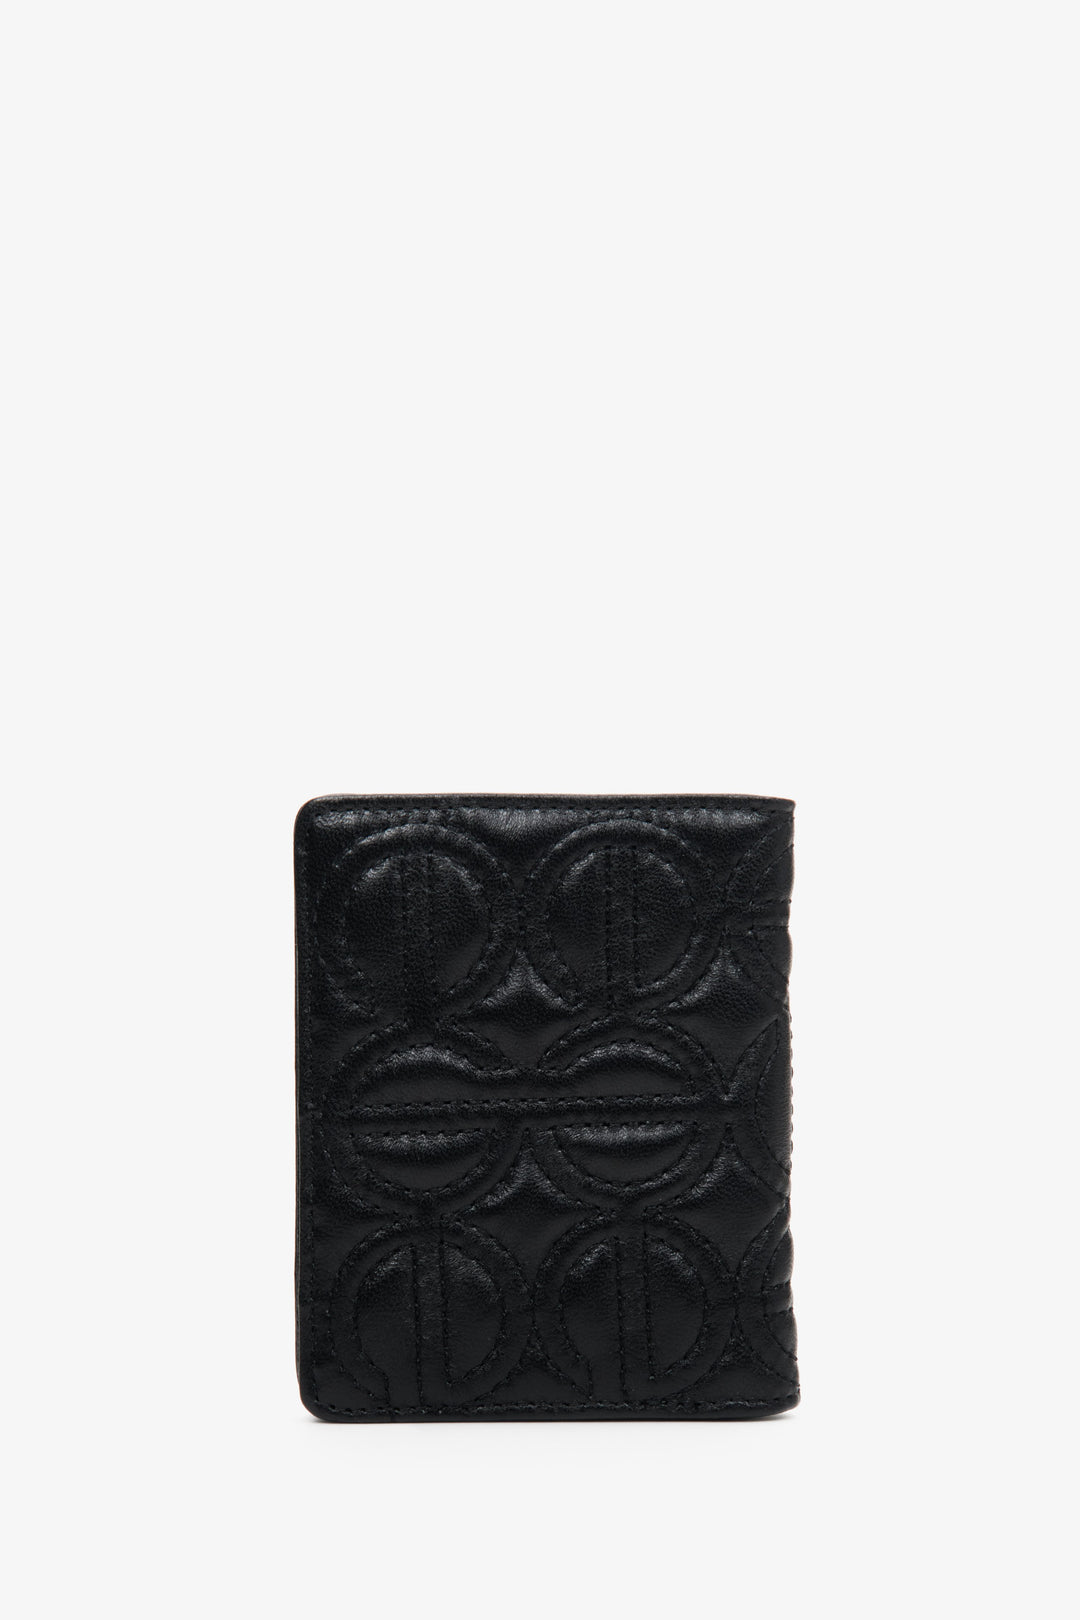 Small women's black card leather wallet by Estro with embossed logo.